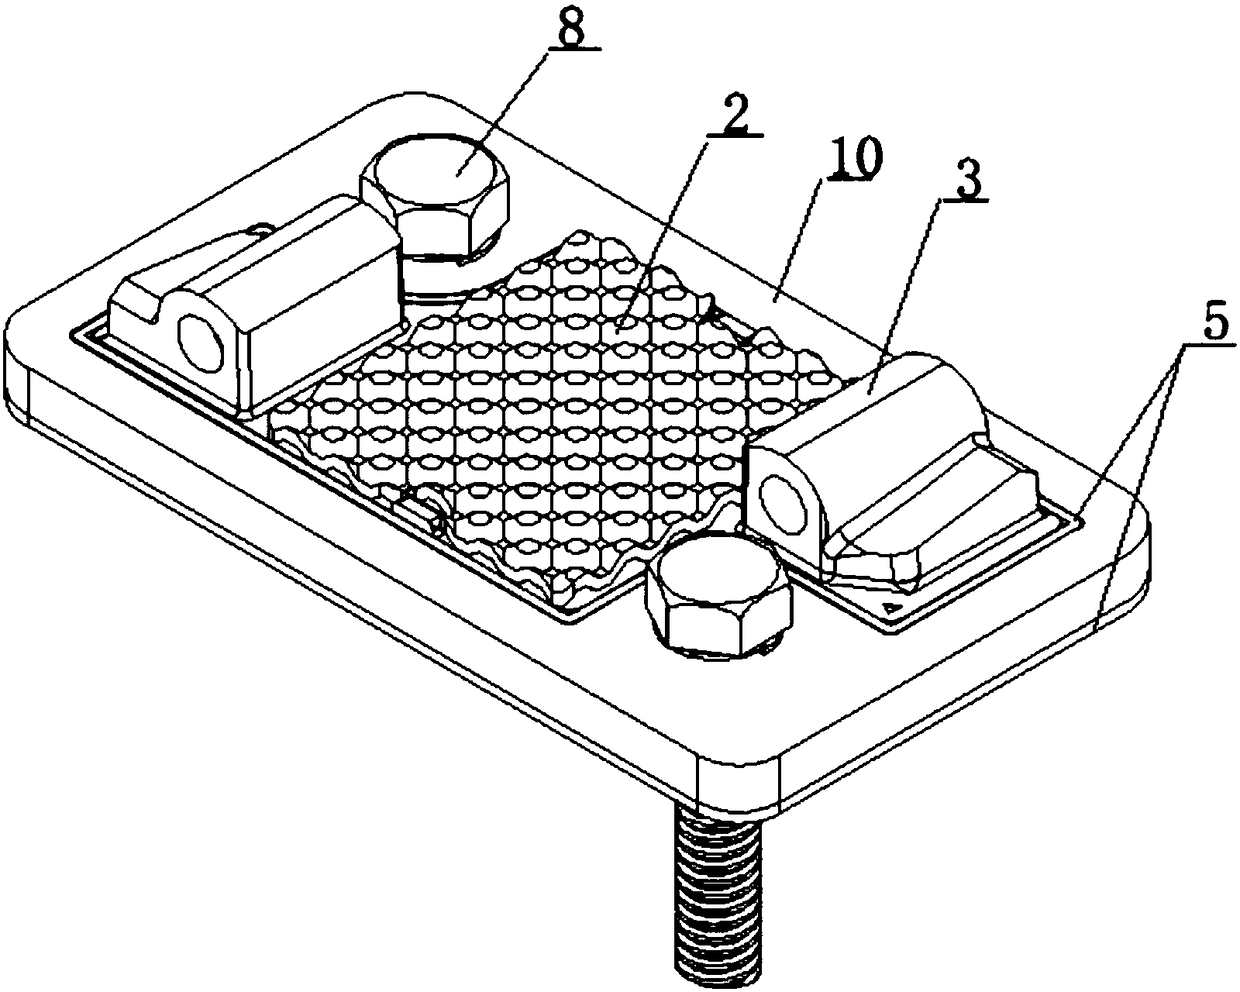 A Constraint-Guided Rail Vibration Damping Fastener Structure